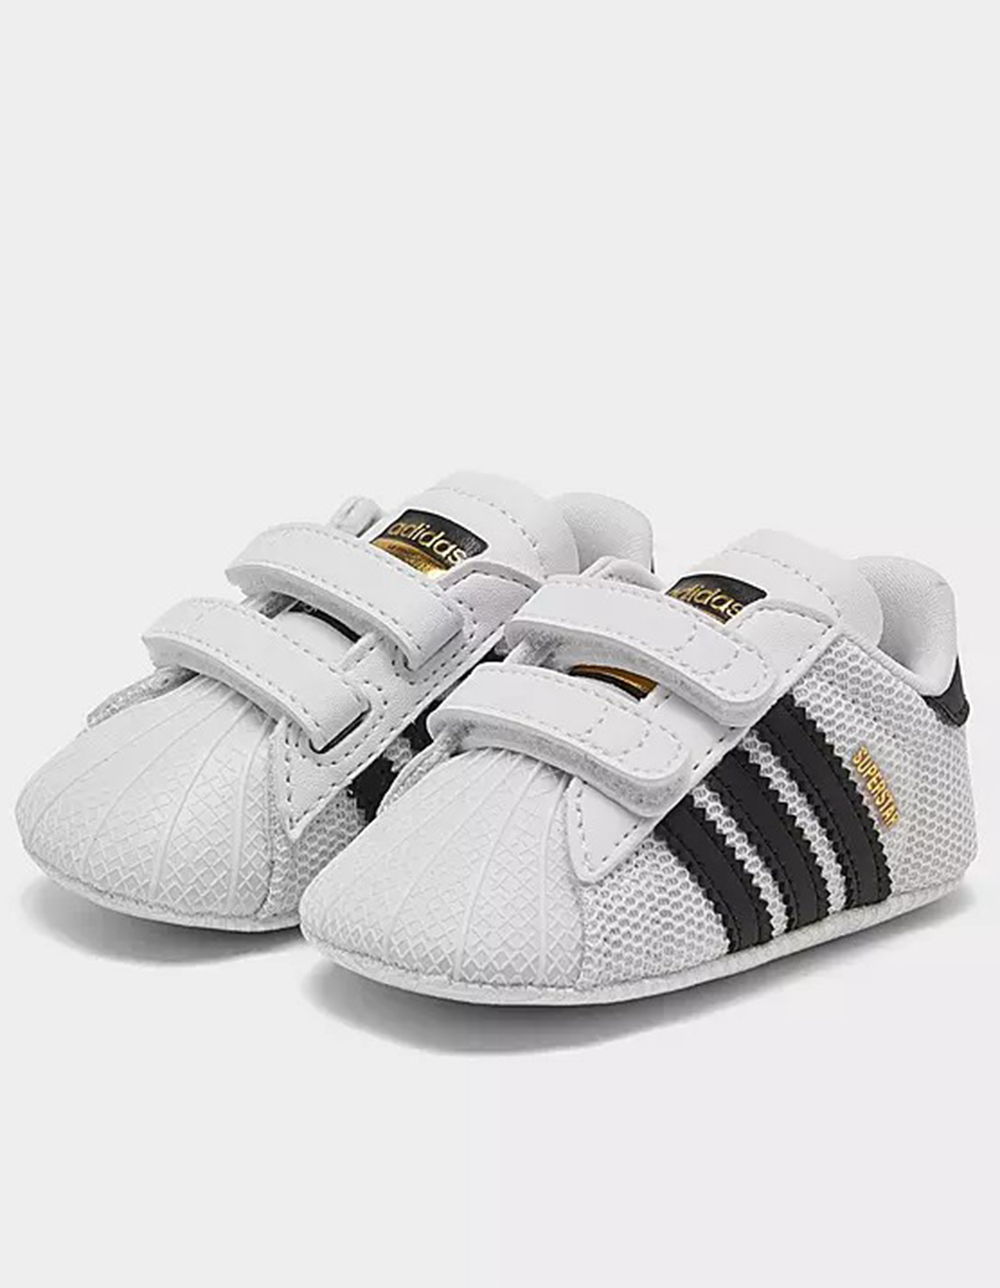 ADIDAS Superstar Womens Shoes - WHITE, Tillys